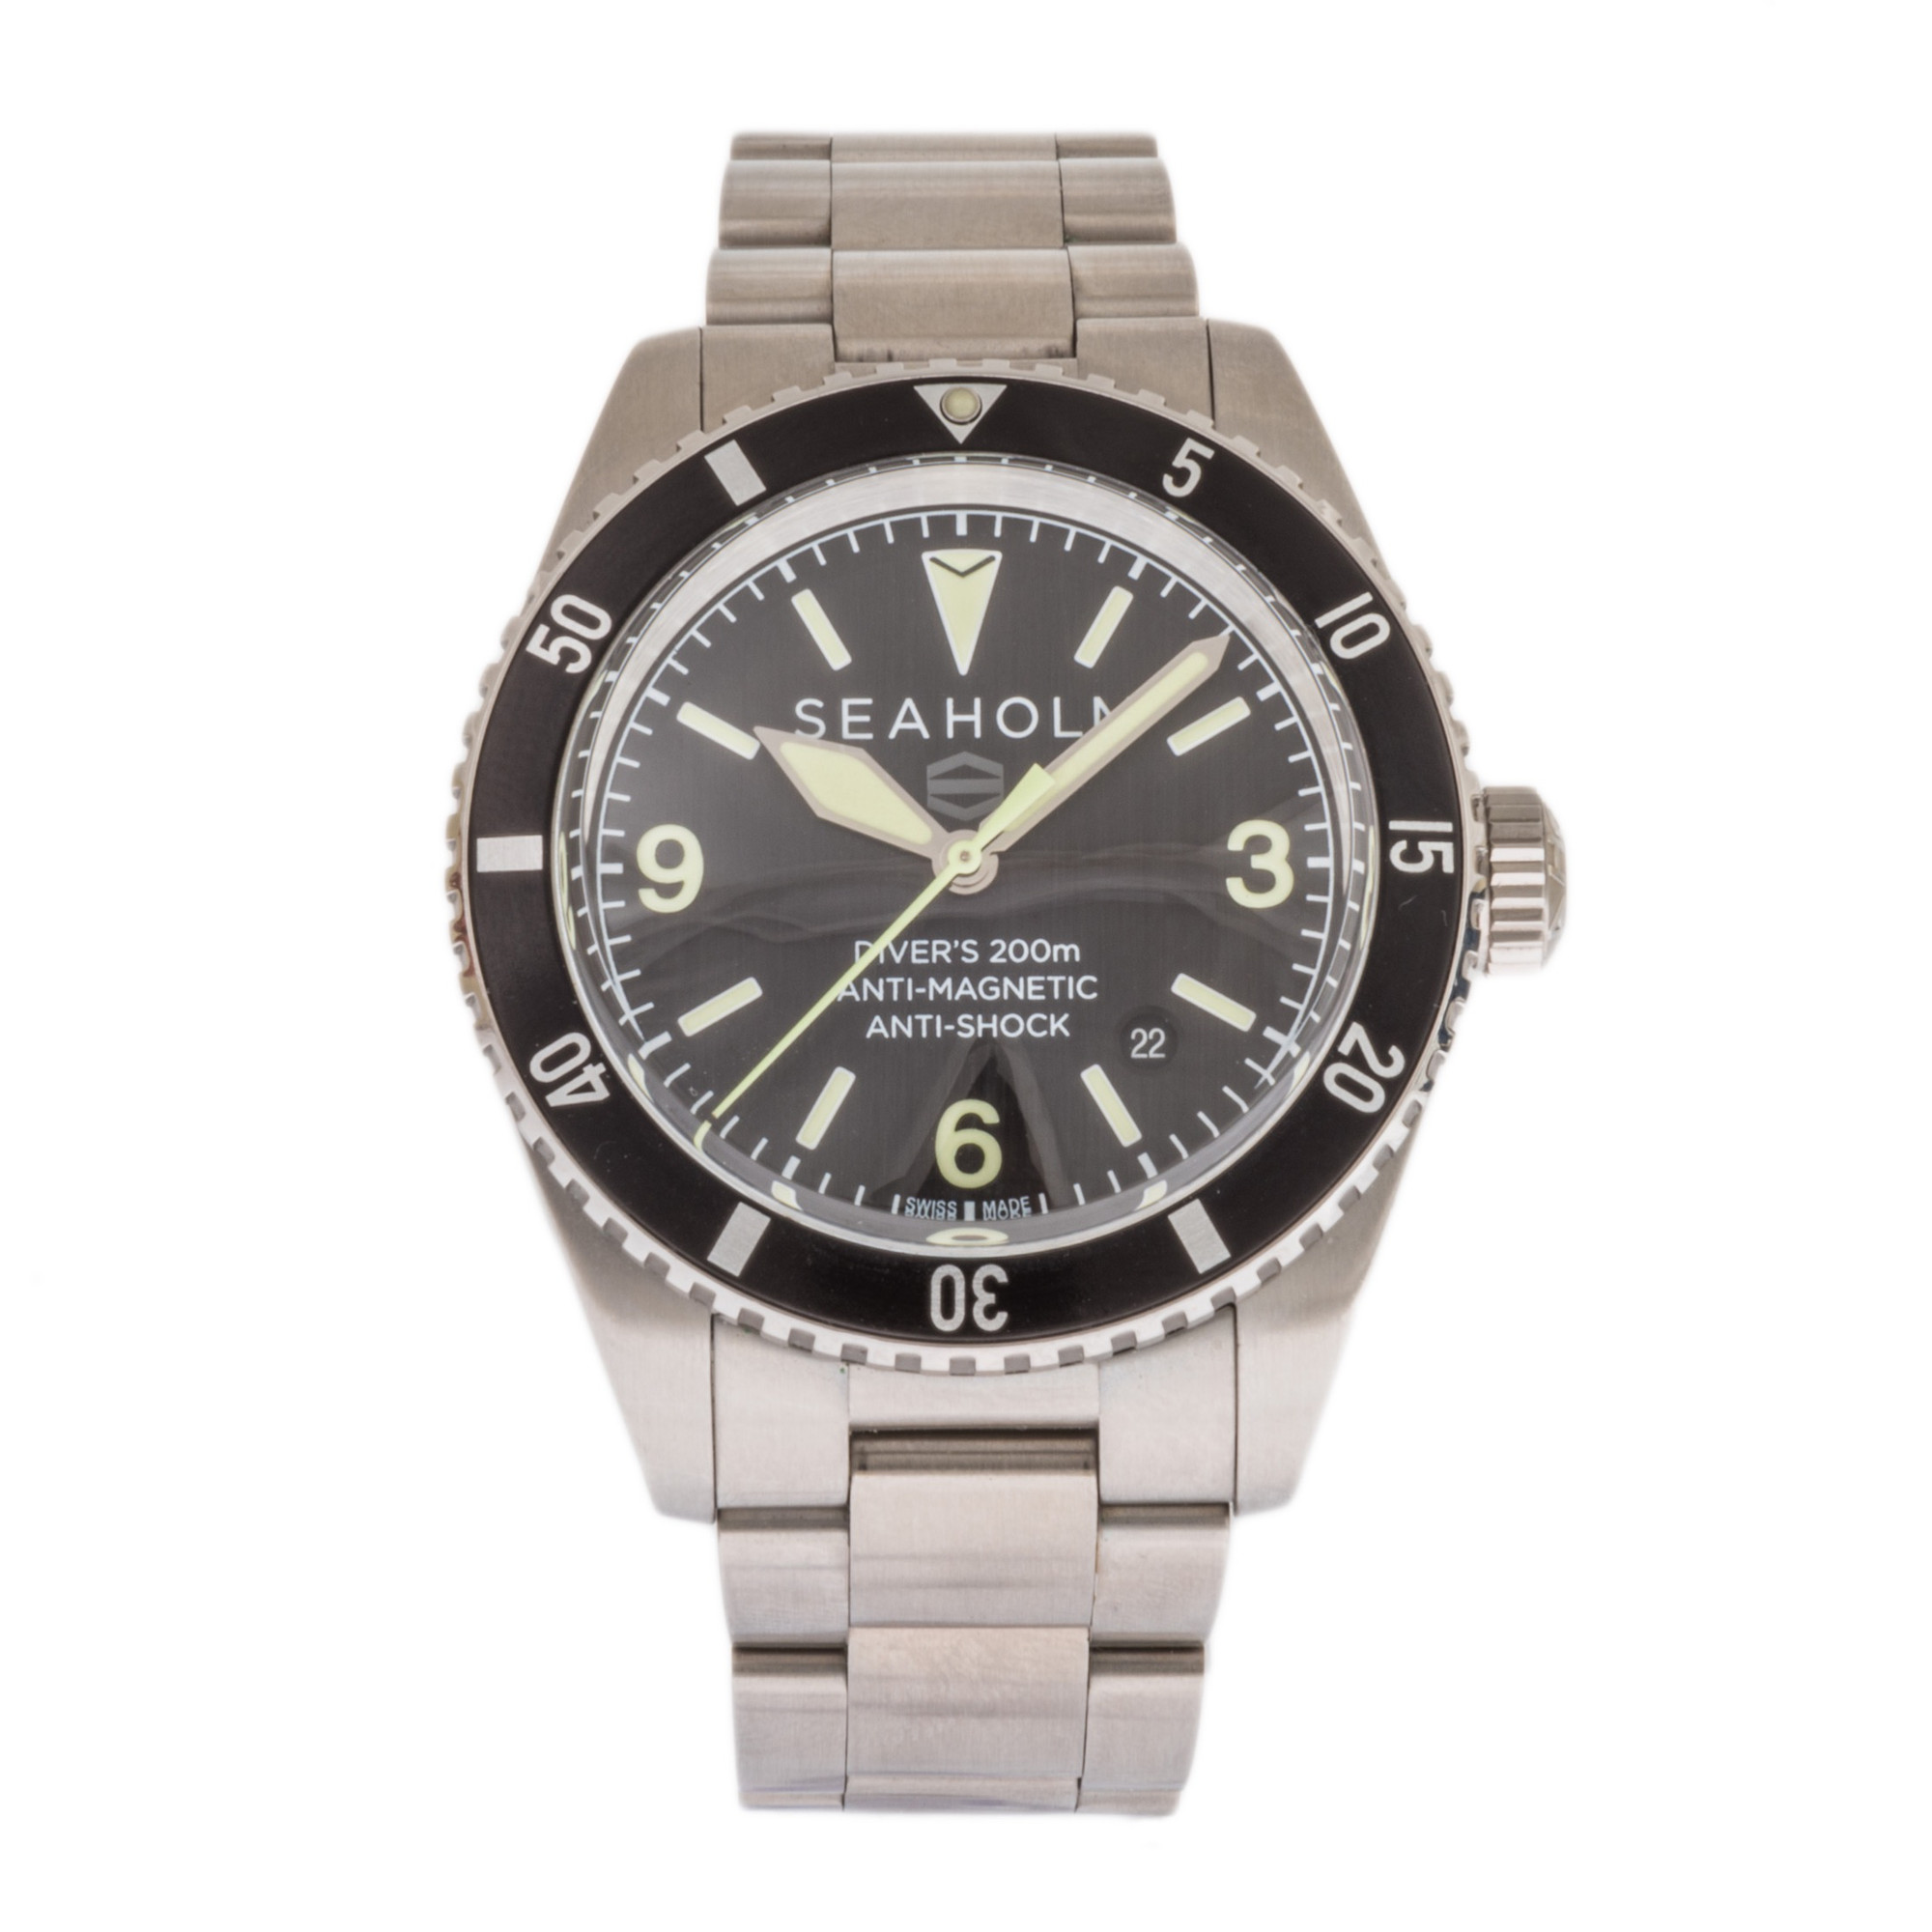 Seaholm Products - DelrayWatch.com